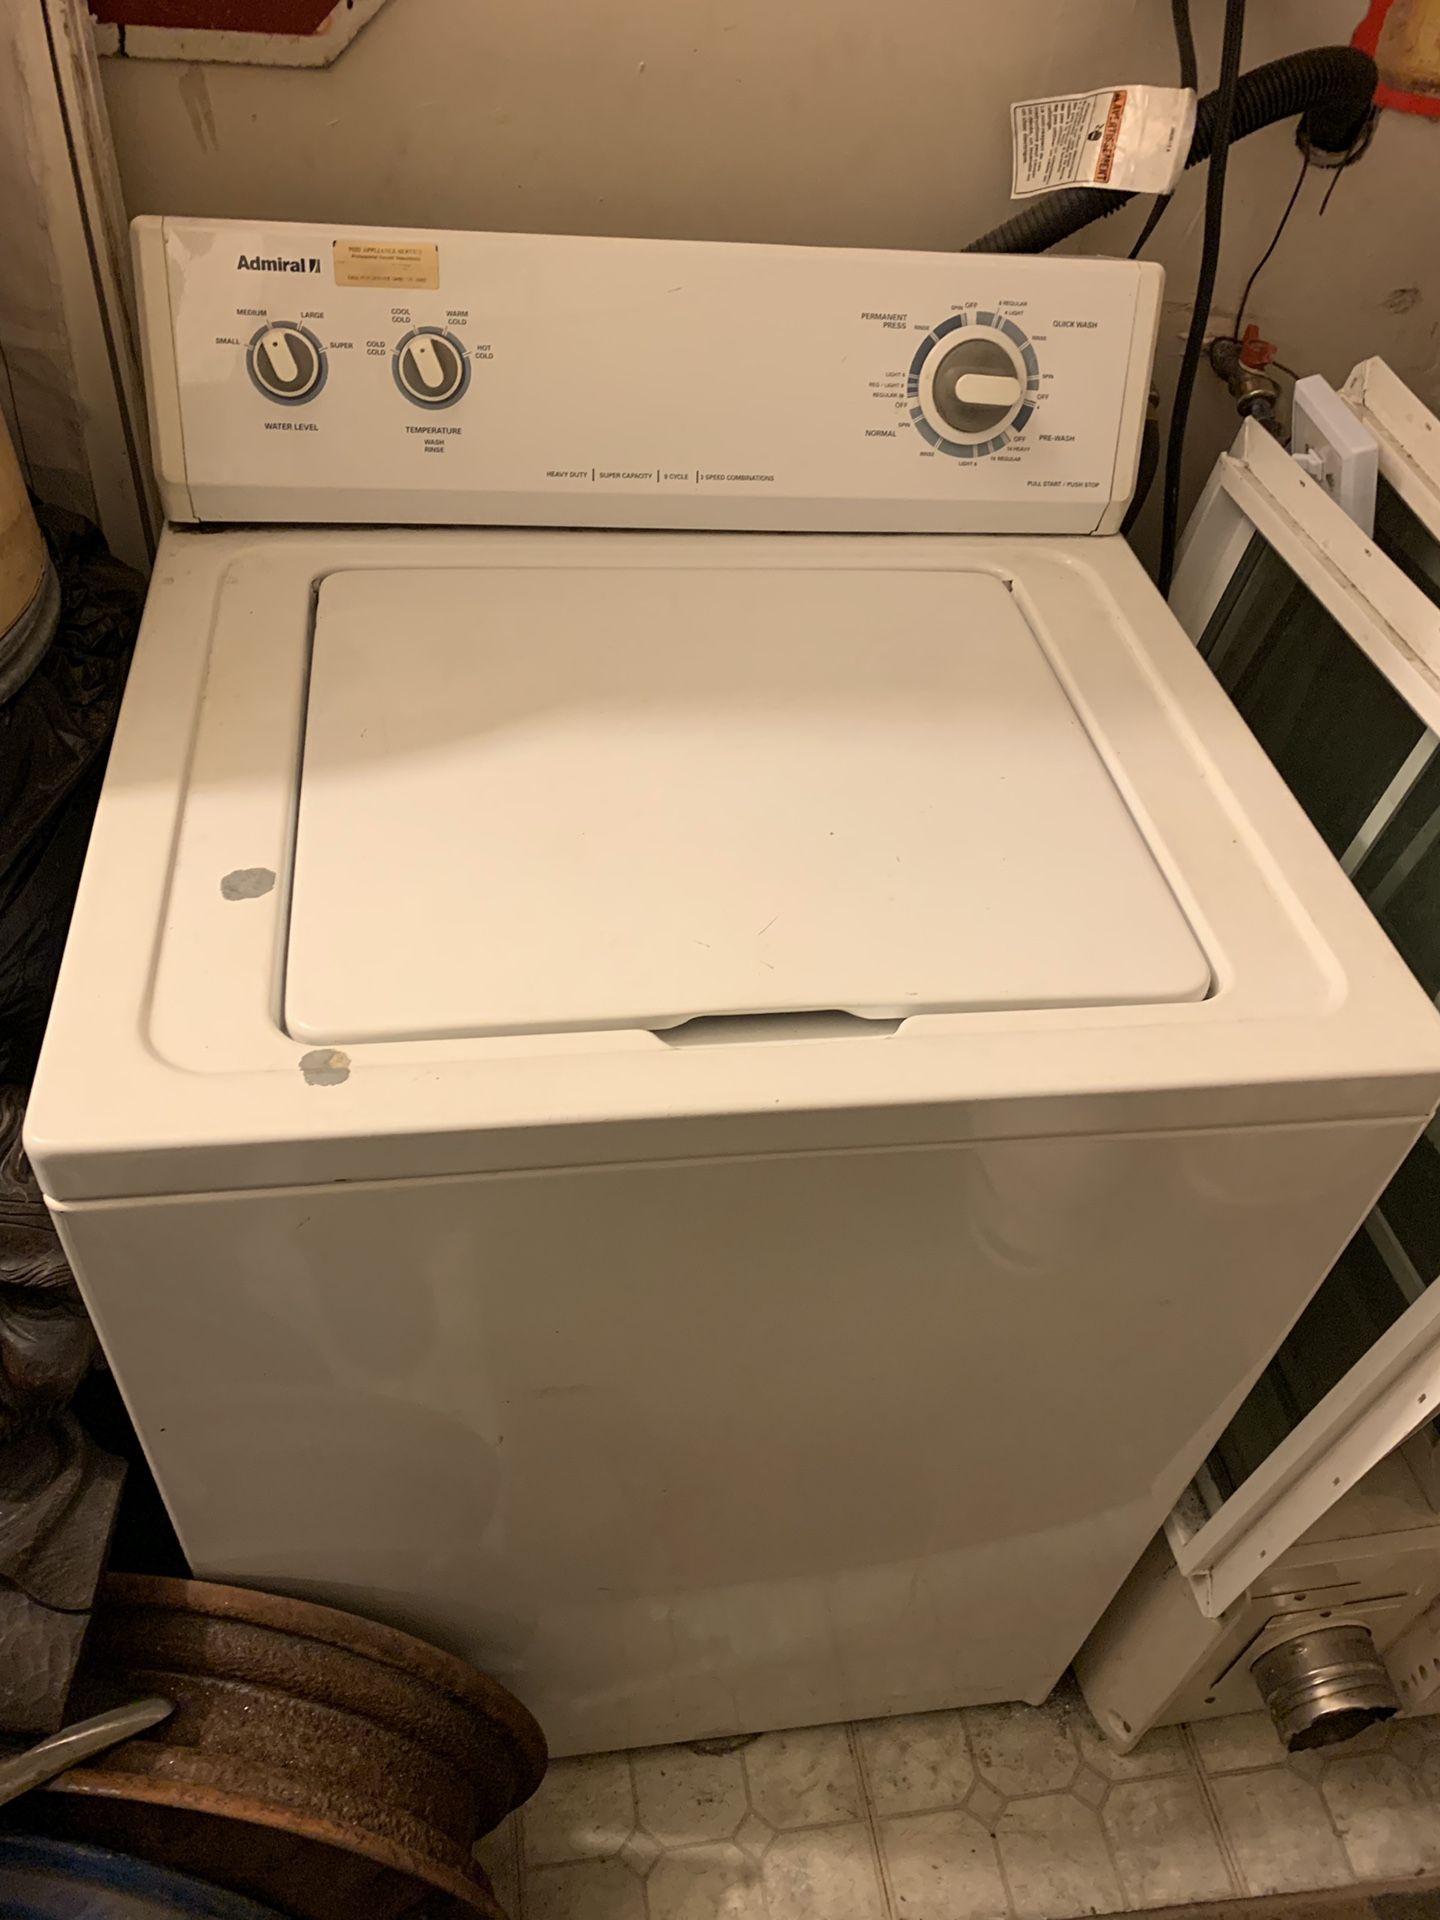 2 washer and dryer sets